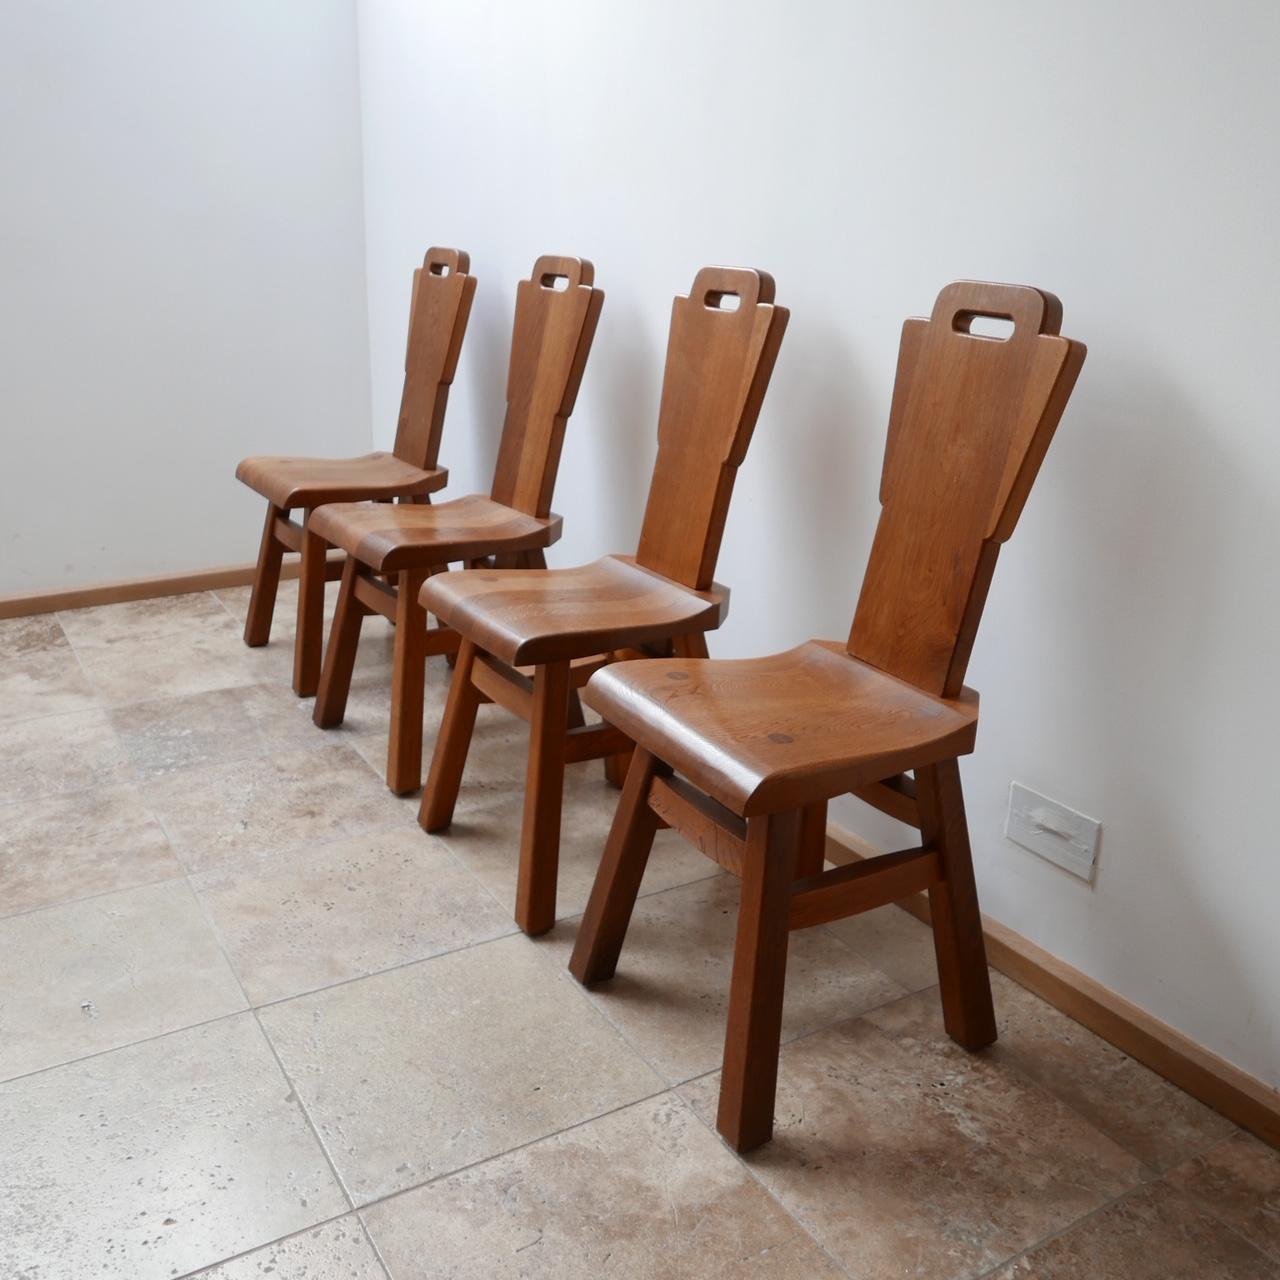 A set of four oak dining chairs.

Brutalist style, Belgium, circa 1970s.

Immense quality of construction using no nails, just quality woodwork in the manner of construction that Pierre Chapo often did his work.

Solid oak, good looking form